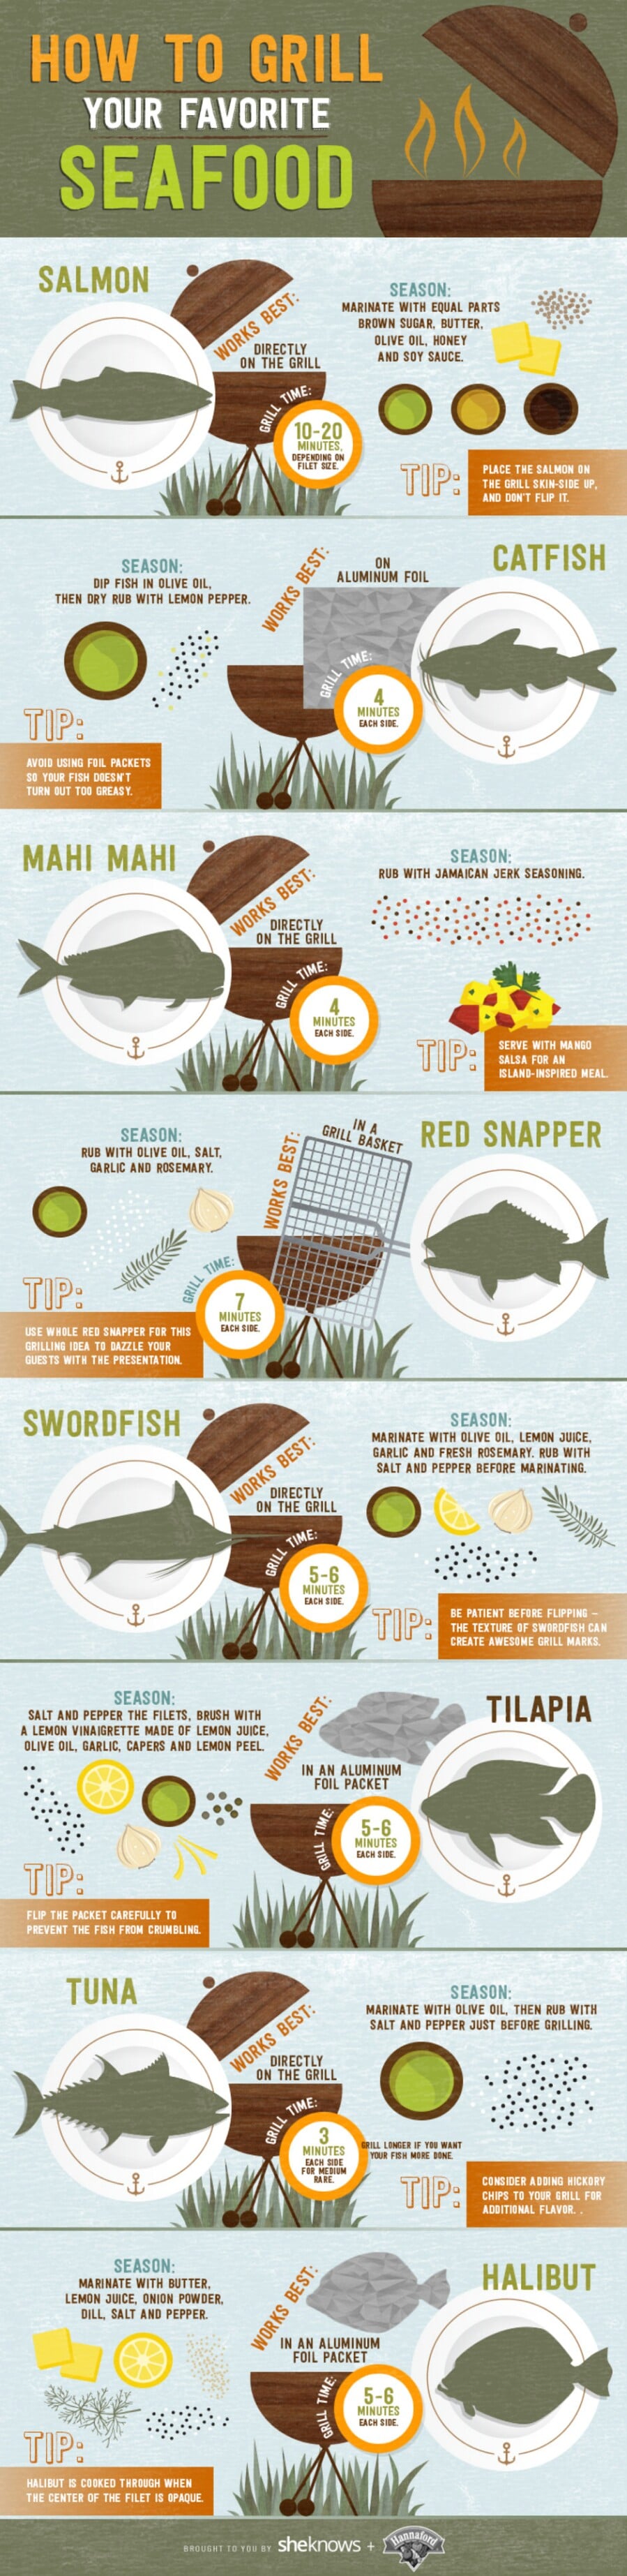 Learn how to grill your favorite fish.